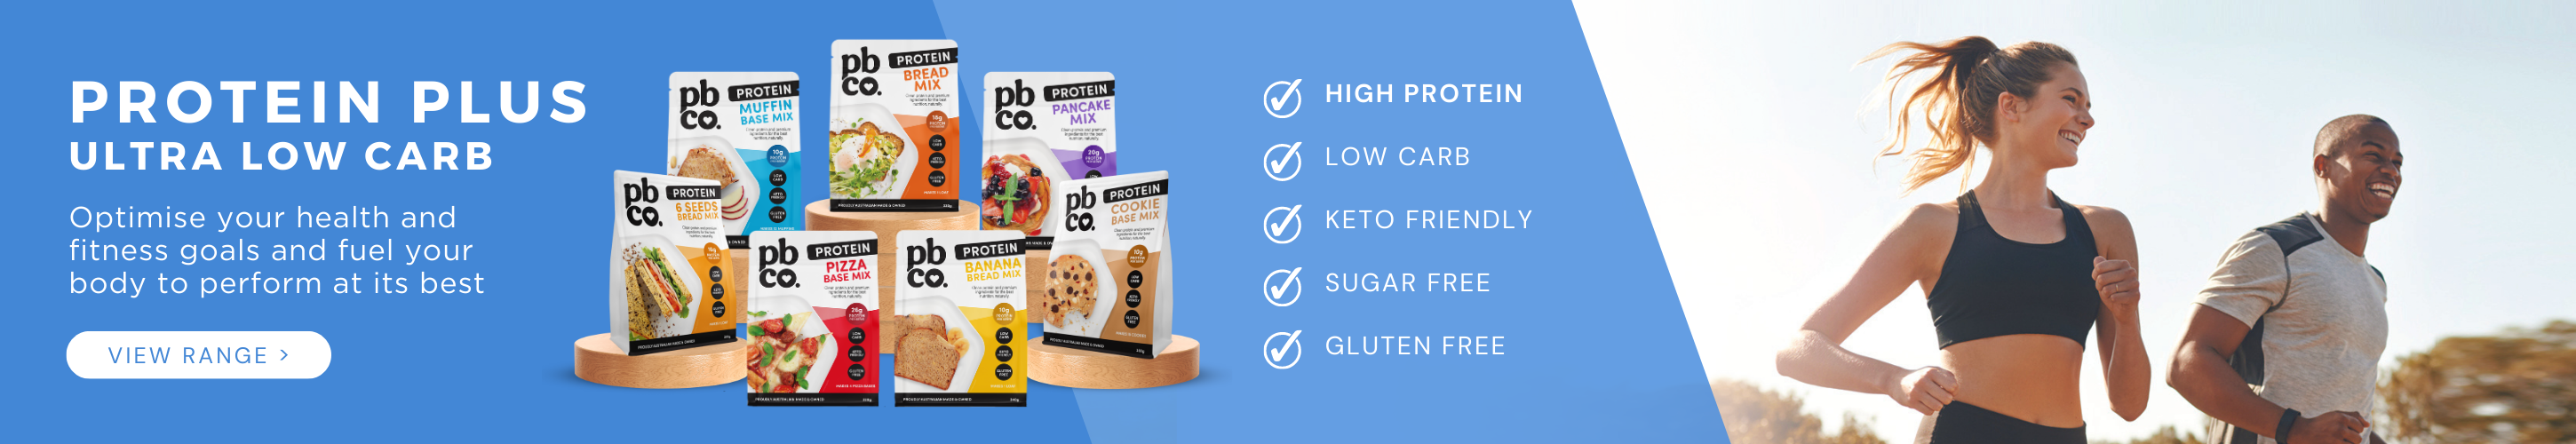 PBCo Lifestyle Foods protein plus ultra low carb range product banner